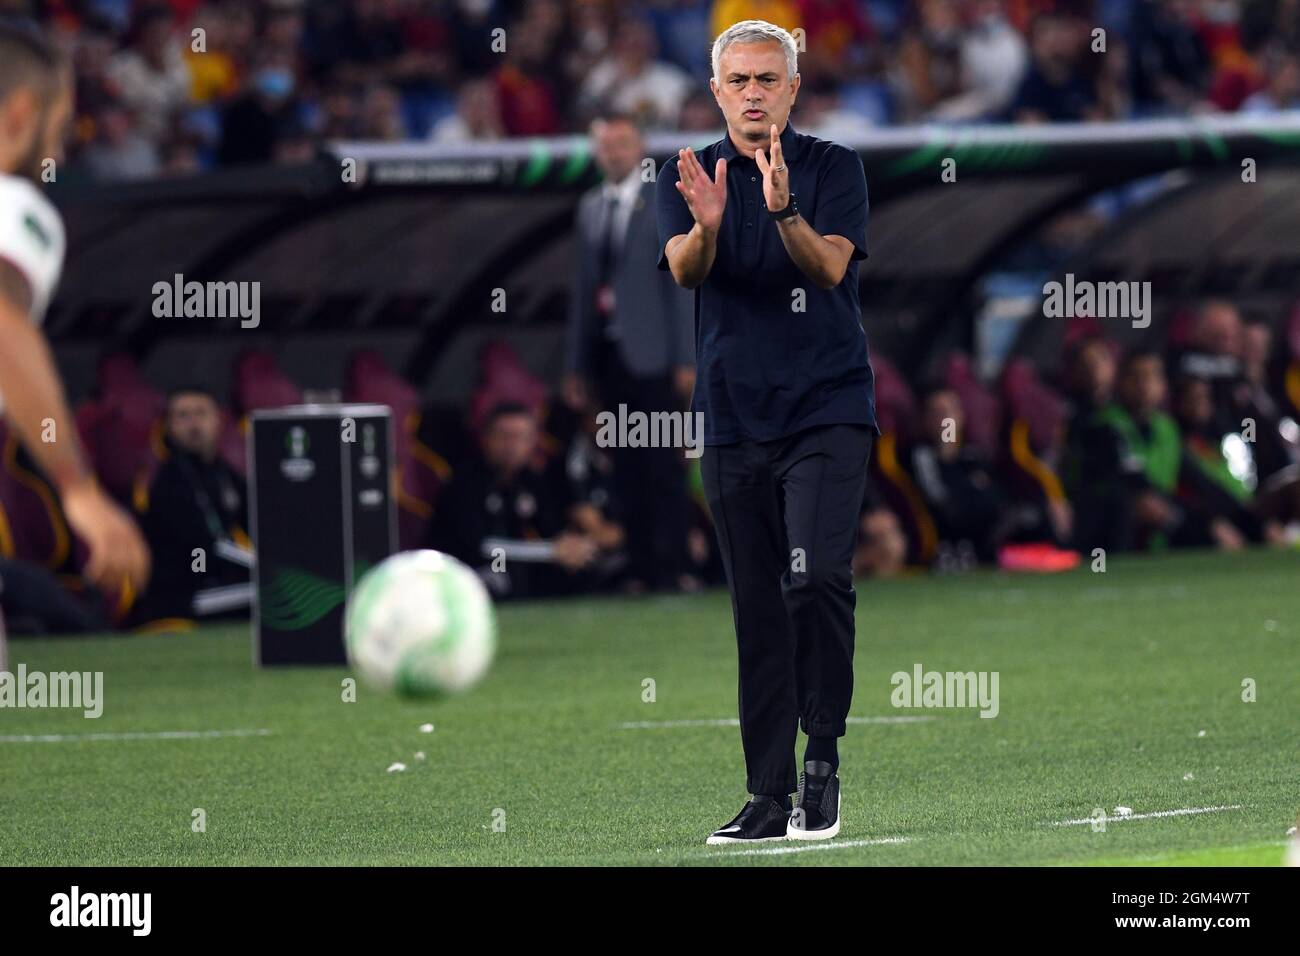 16th September 2021: Stadio Olimpico, Rome, Italy; Roma trainer Jose Mourinho returns the loose ball during the Conference League match between AS Roma versus CSKA Sofia at Olimpico stadium Stock Photo